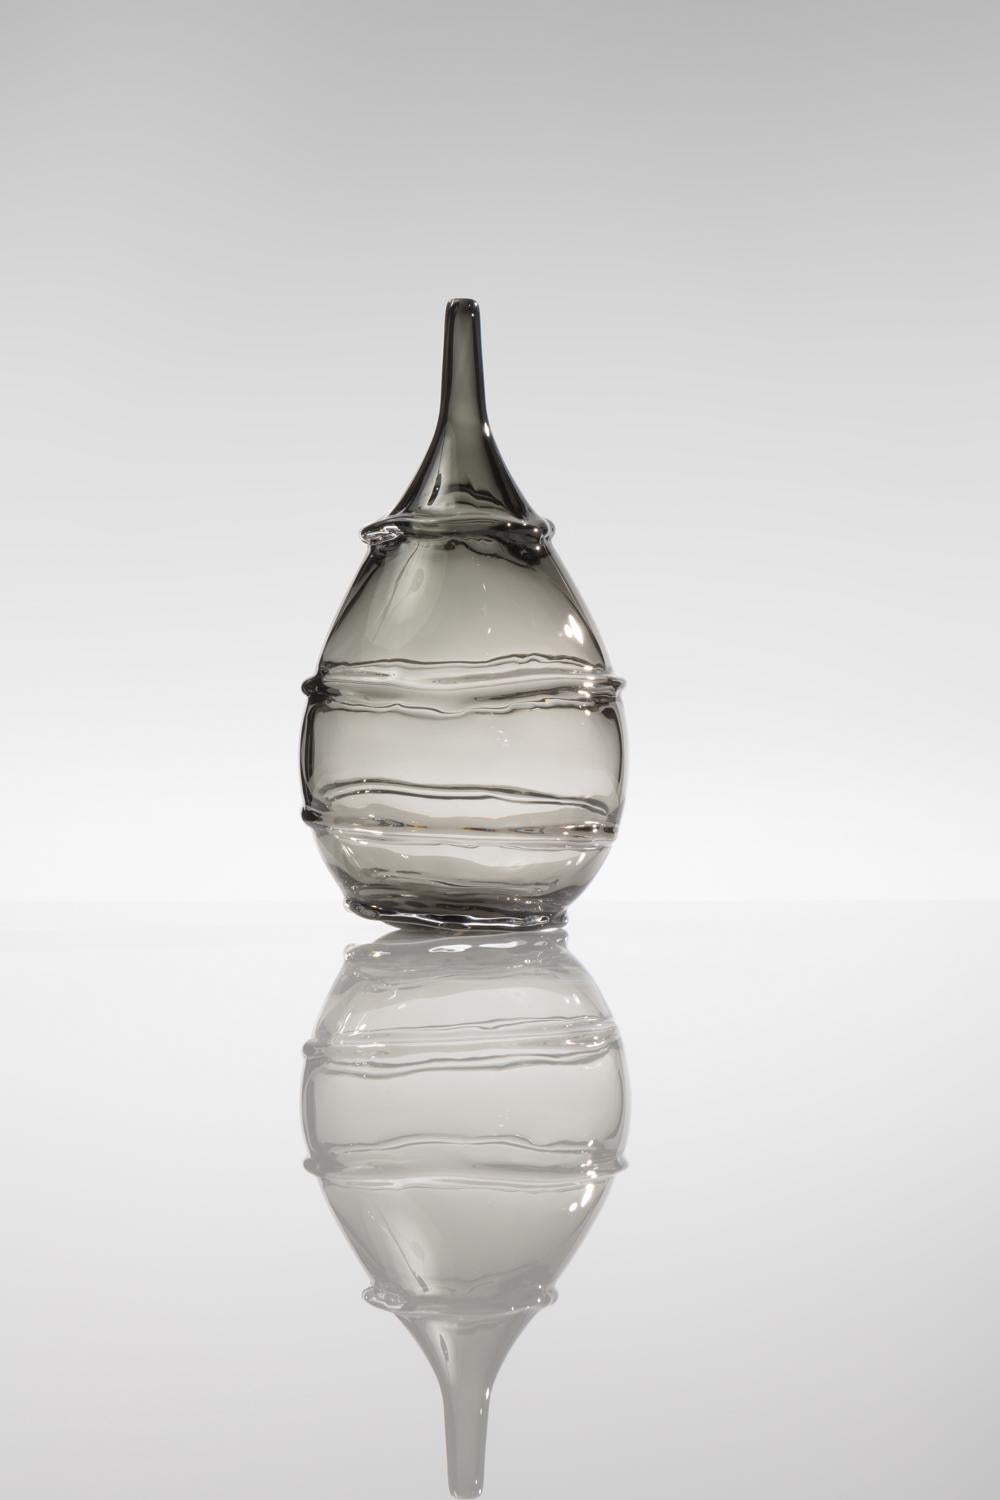 Hand blown glass design by Kazuki Takizawa. Individually crafted at KT Glassworks in Los Angeles, California. Each piece is textured one ring at a time and uniquely made. No mold is used in the production of these pieces. All measurements are